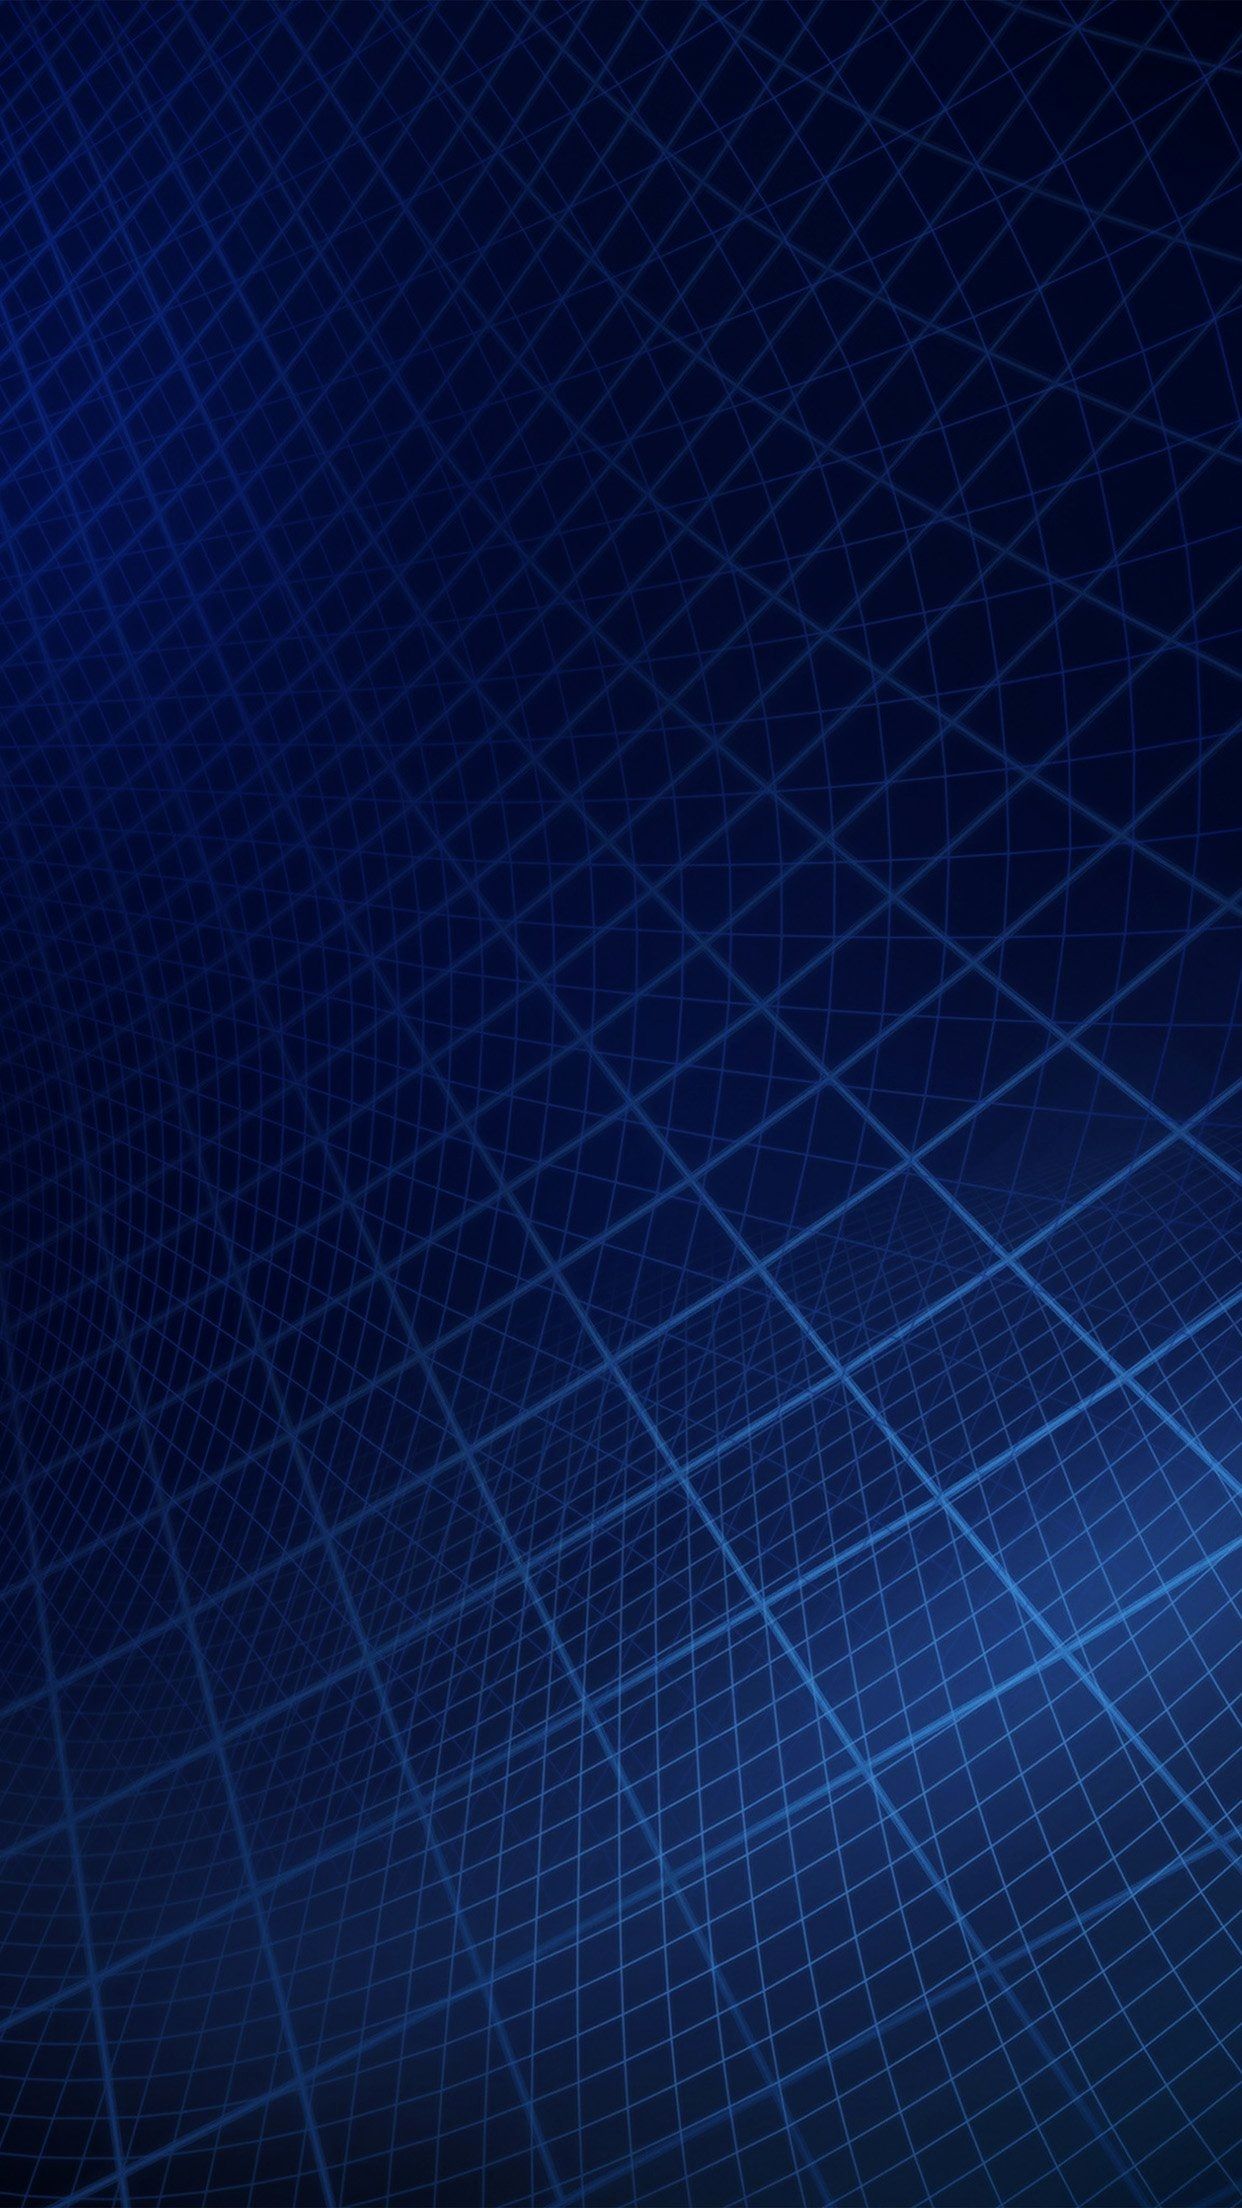 Blue android Wallpaper New Abstract Line Digital Dark Blue Pattern android Wallpaper android HD Wallpaper This Year of The Hudson